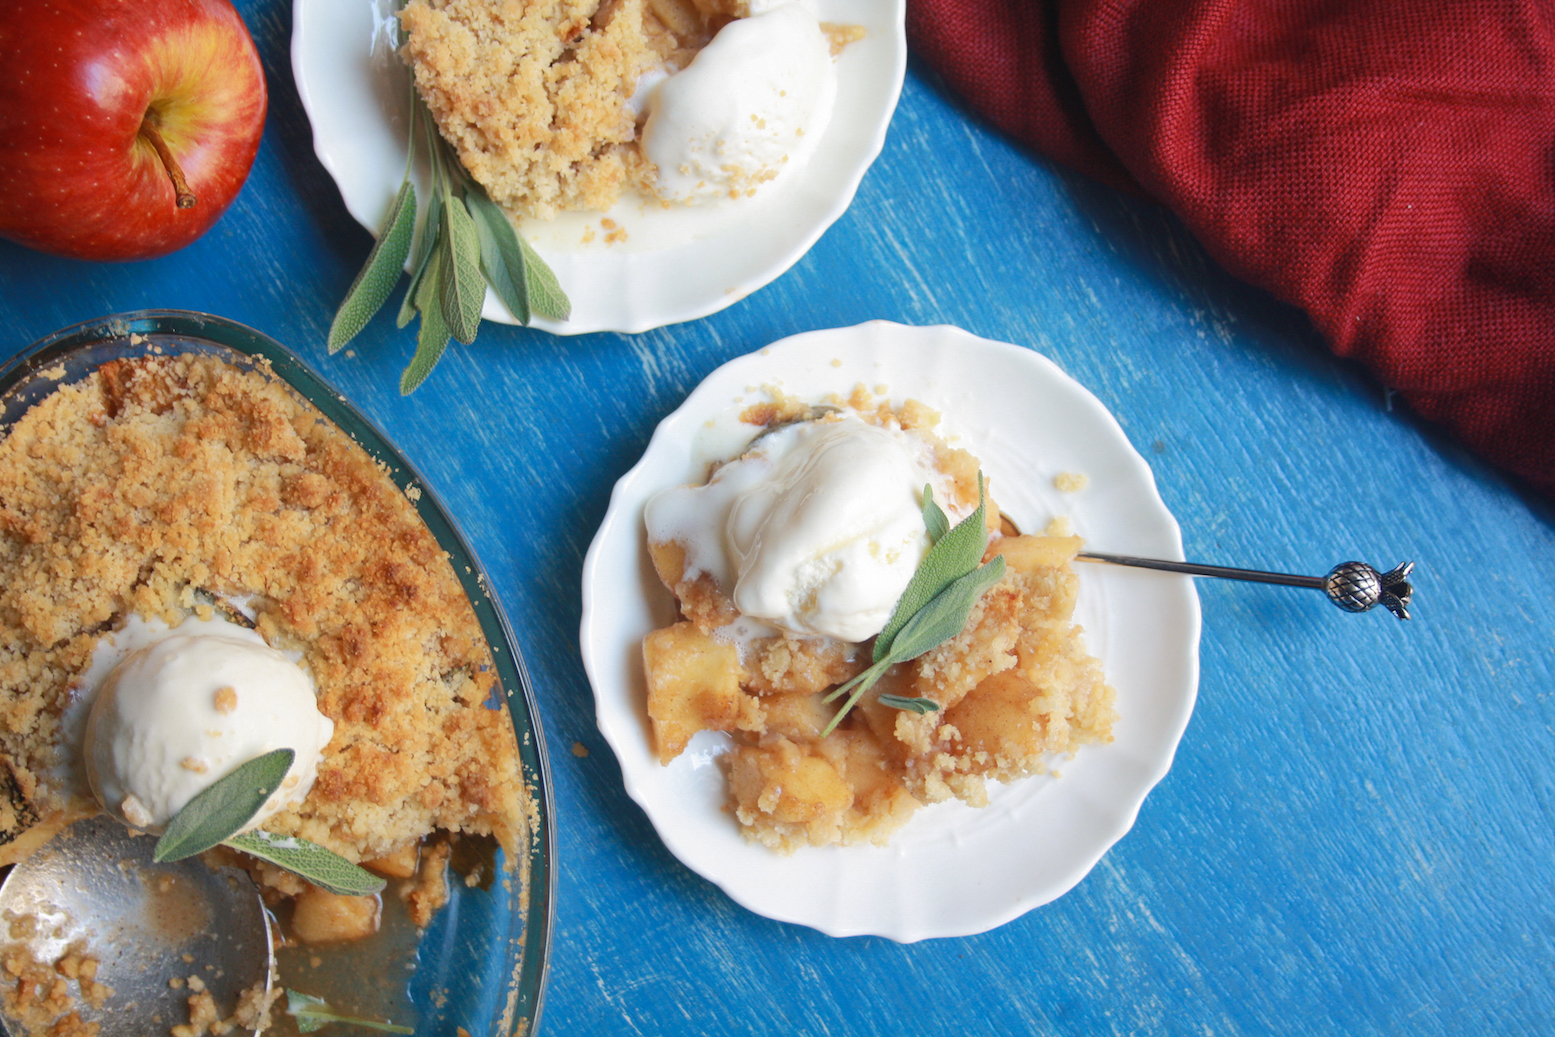 Classic apple crumble taken up a notch with the subtle, floral aroma of fresh sage leaves!